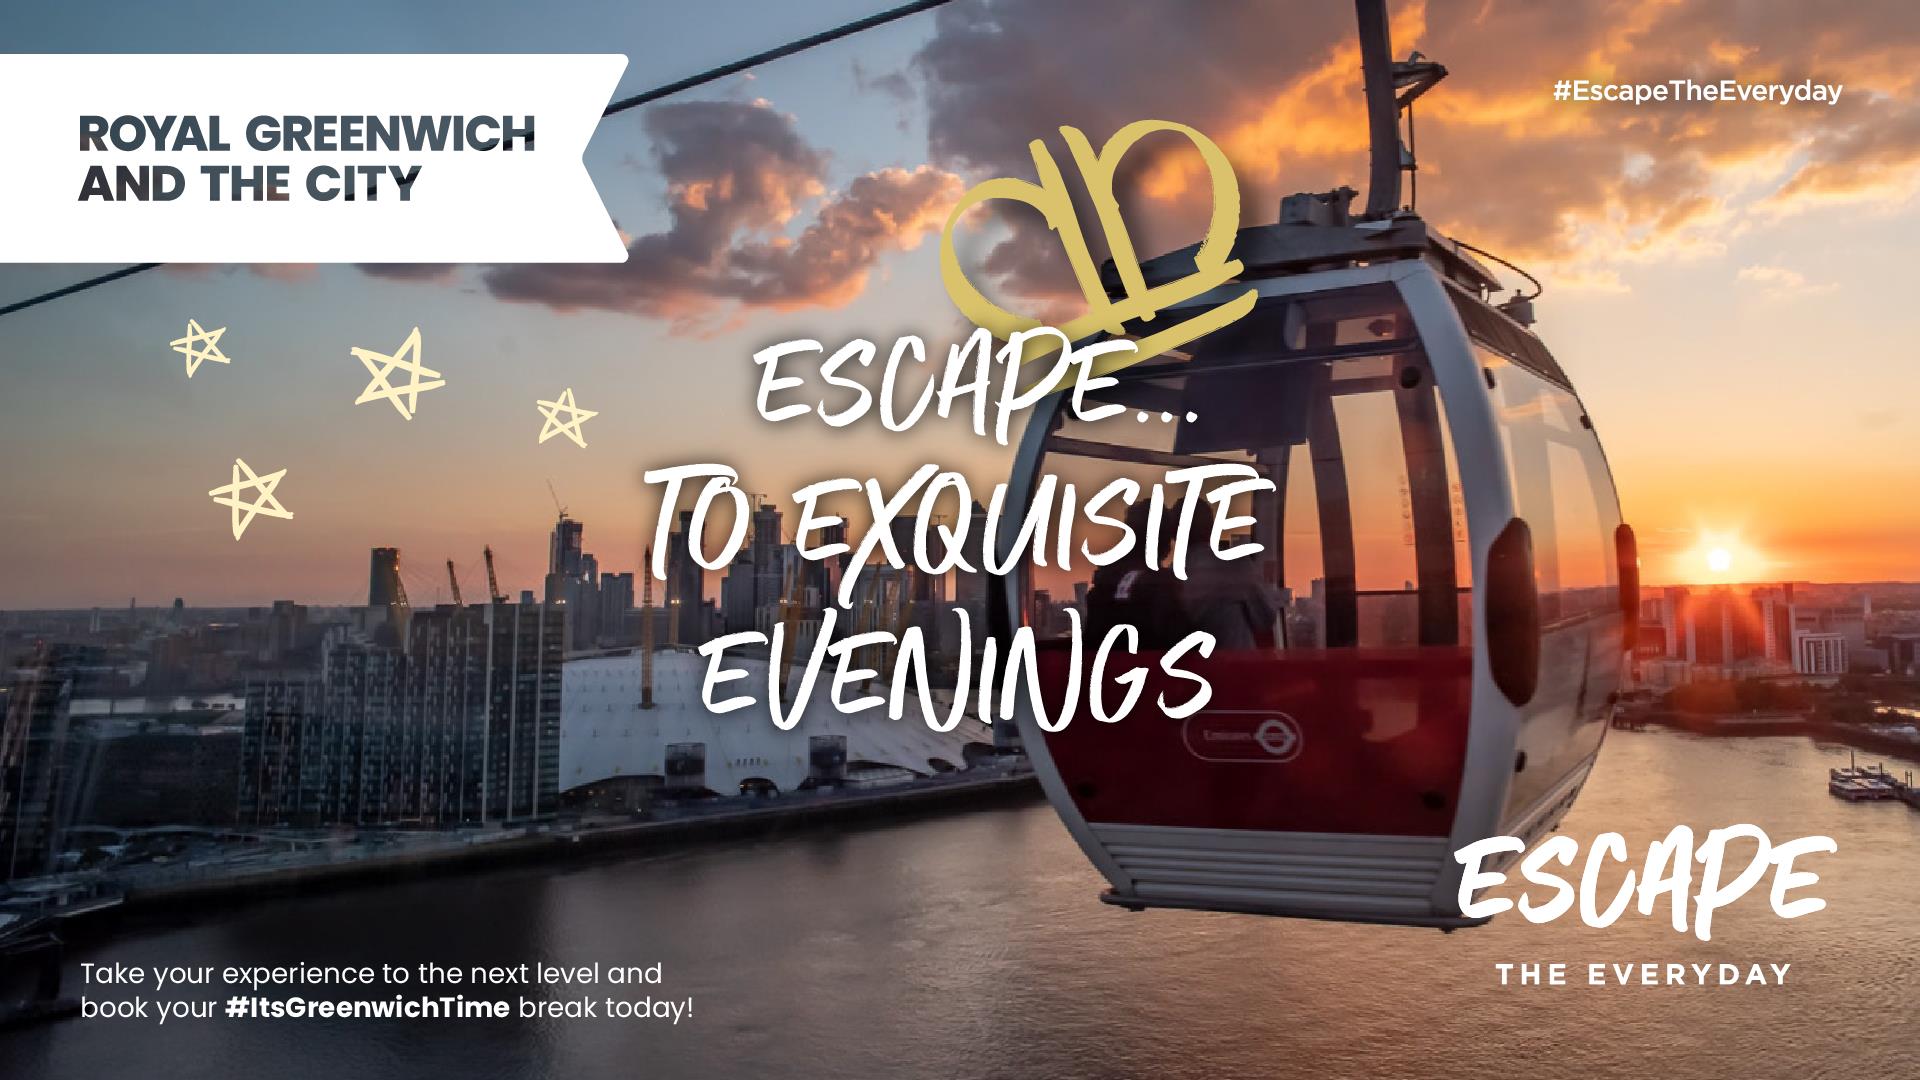 Escape the Everyday - Royal Greenwich and The City